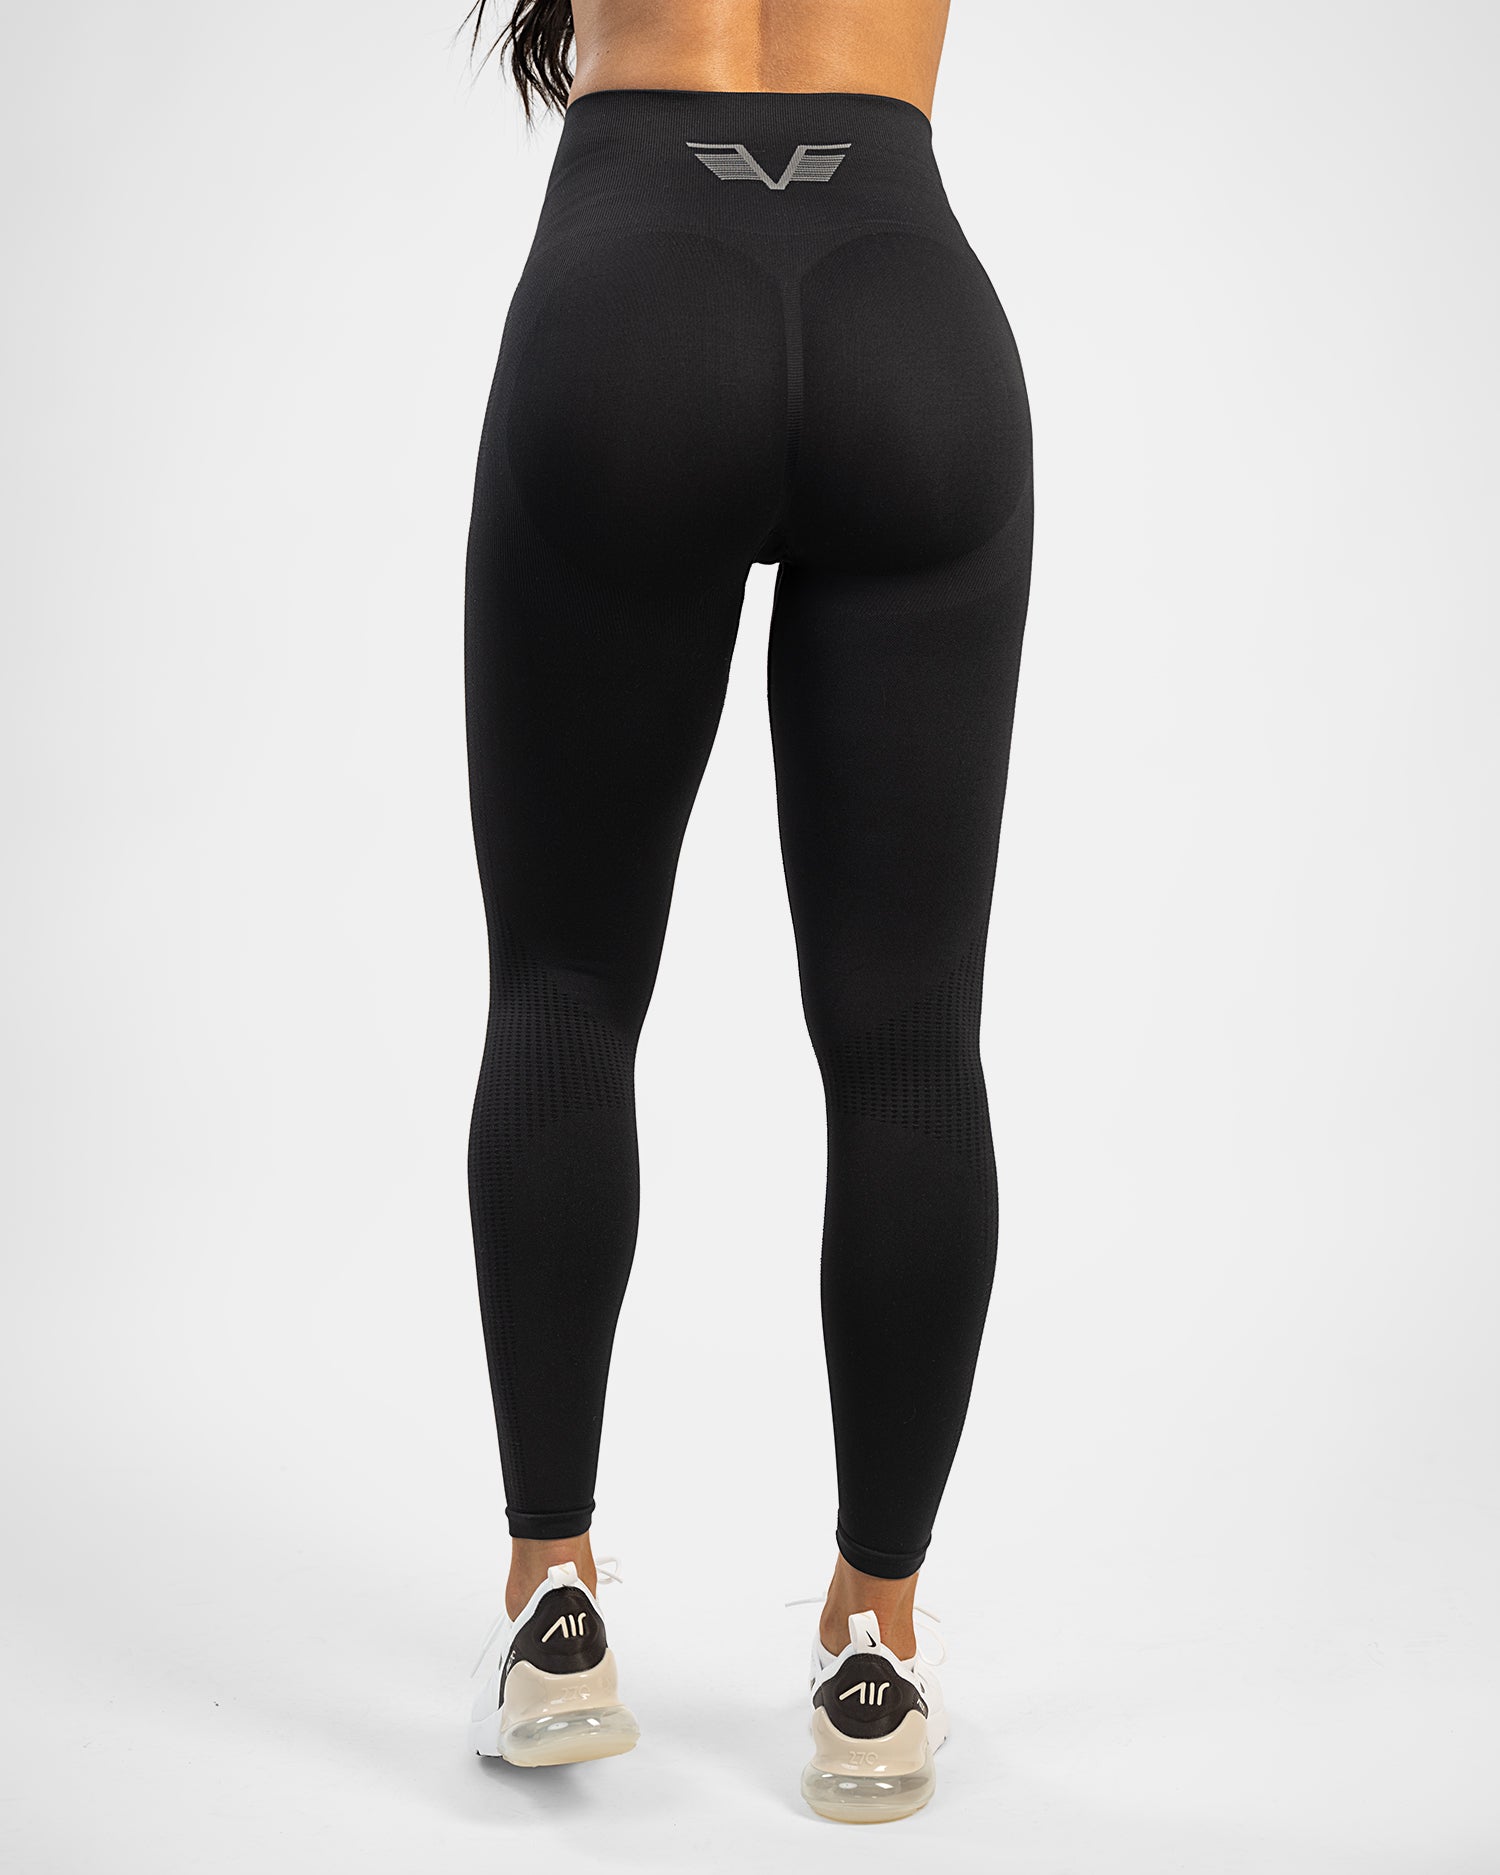 GAVELO Seamless Booster Black Tights